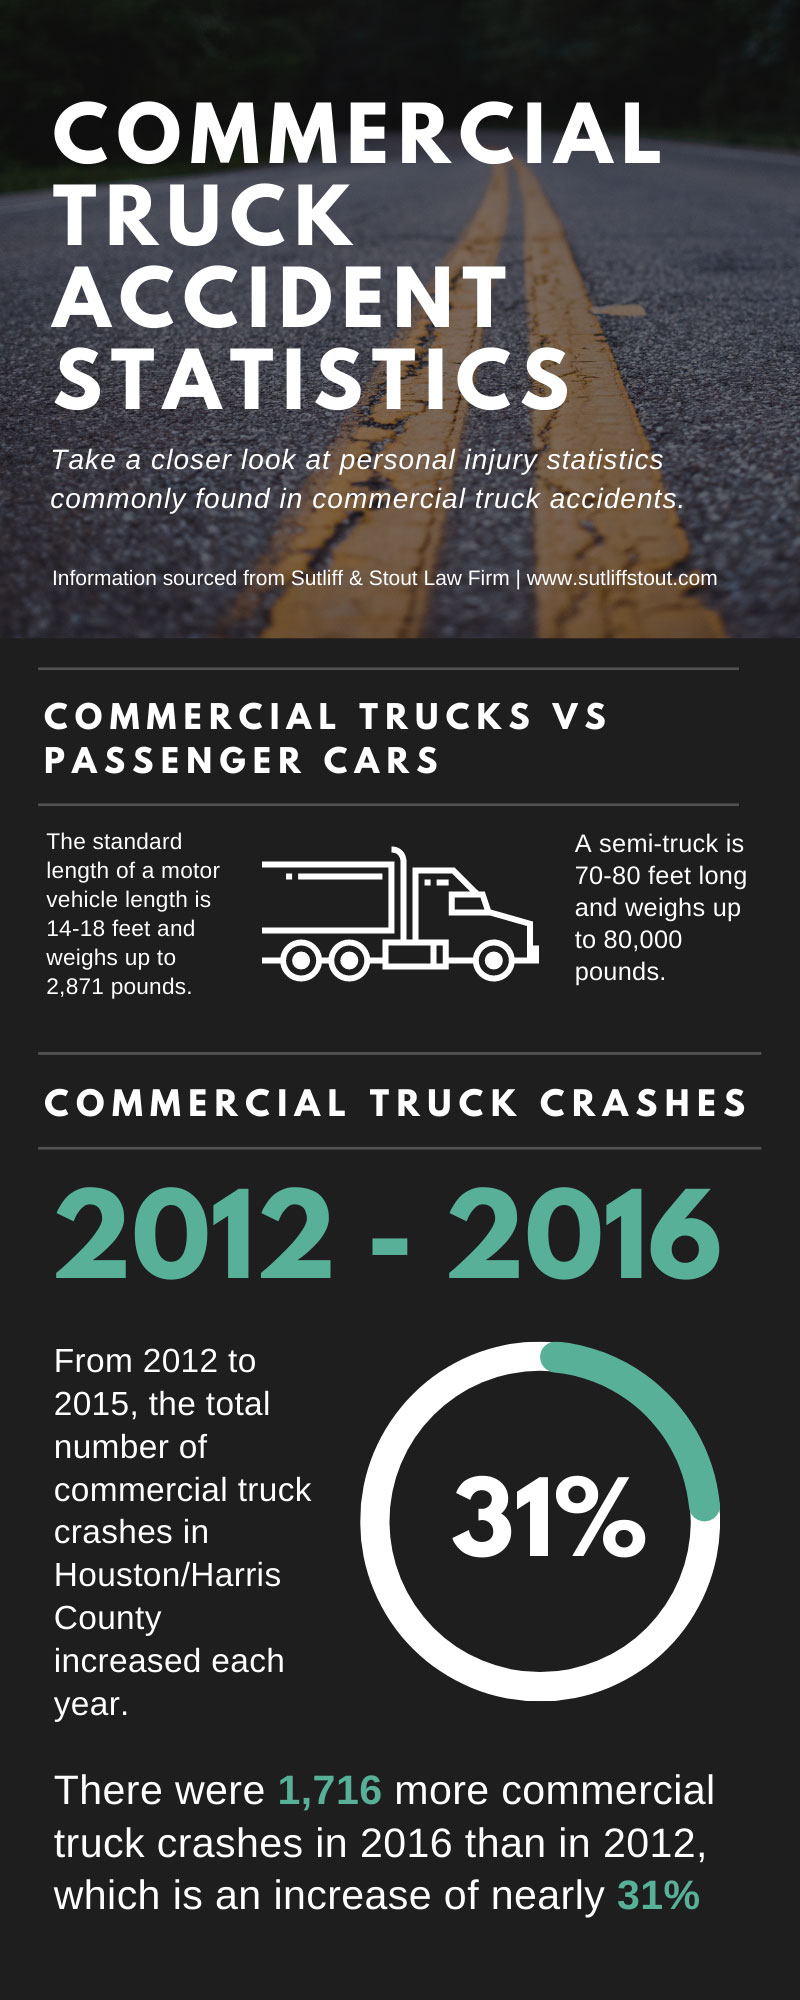 commercial truck statistics infographic